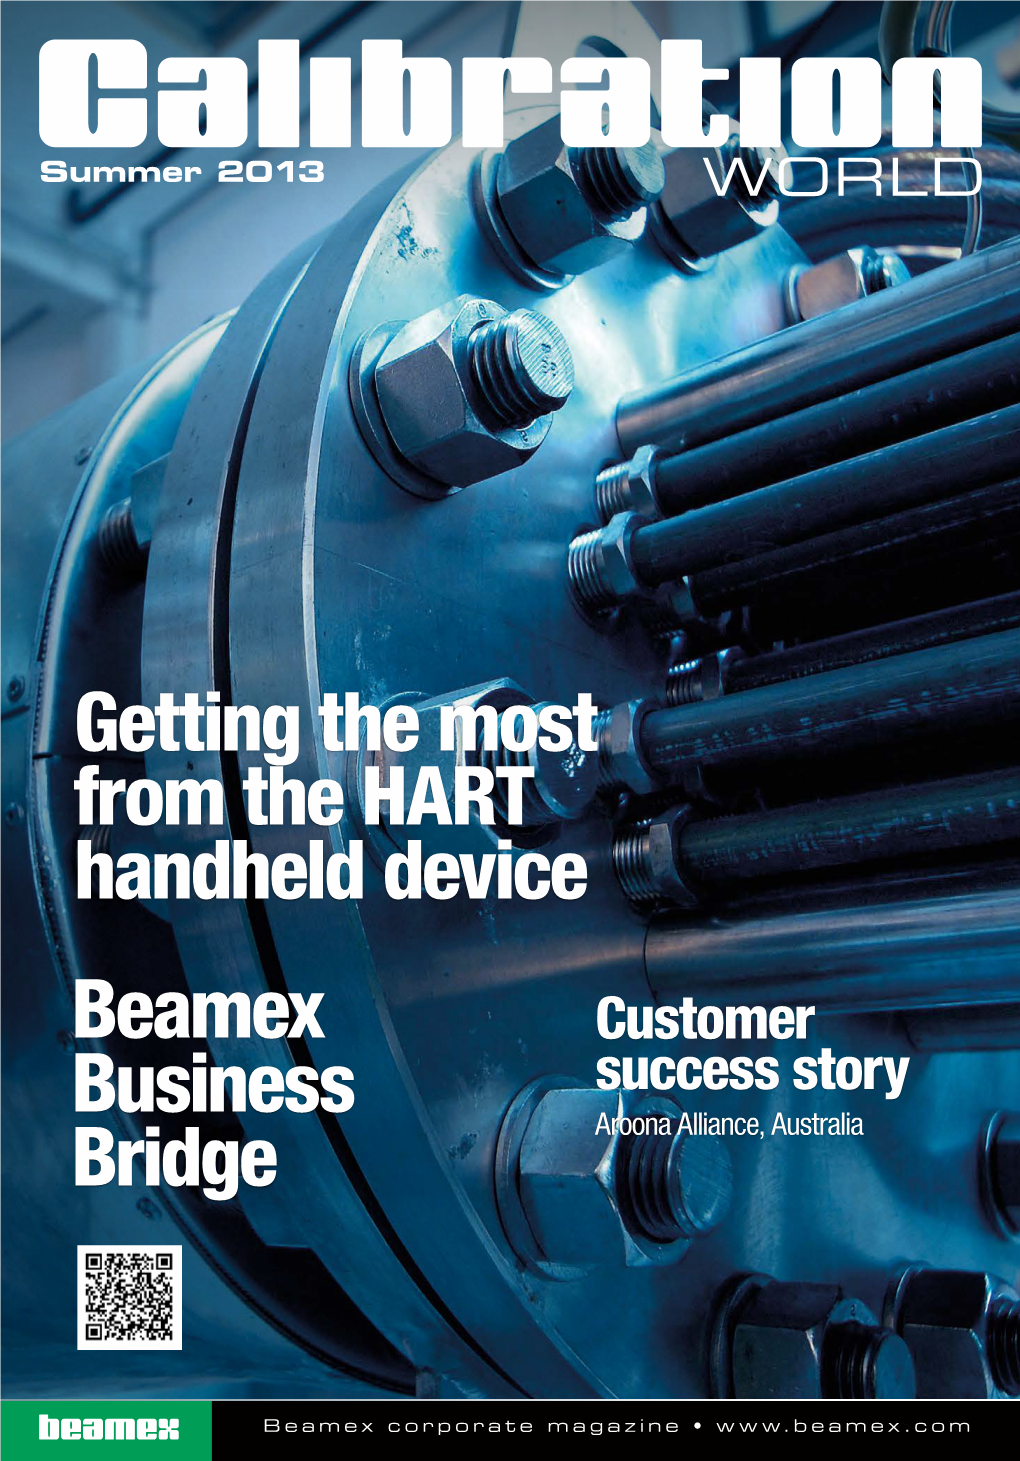 Beamex Business Bridge Getting the Most from the HART Handheld Device